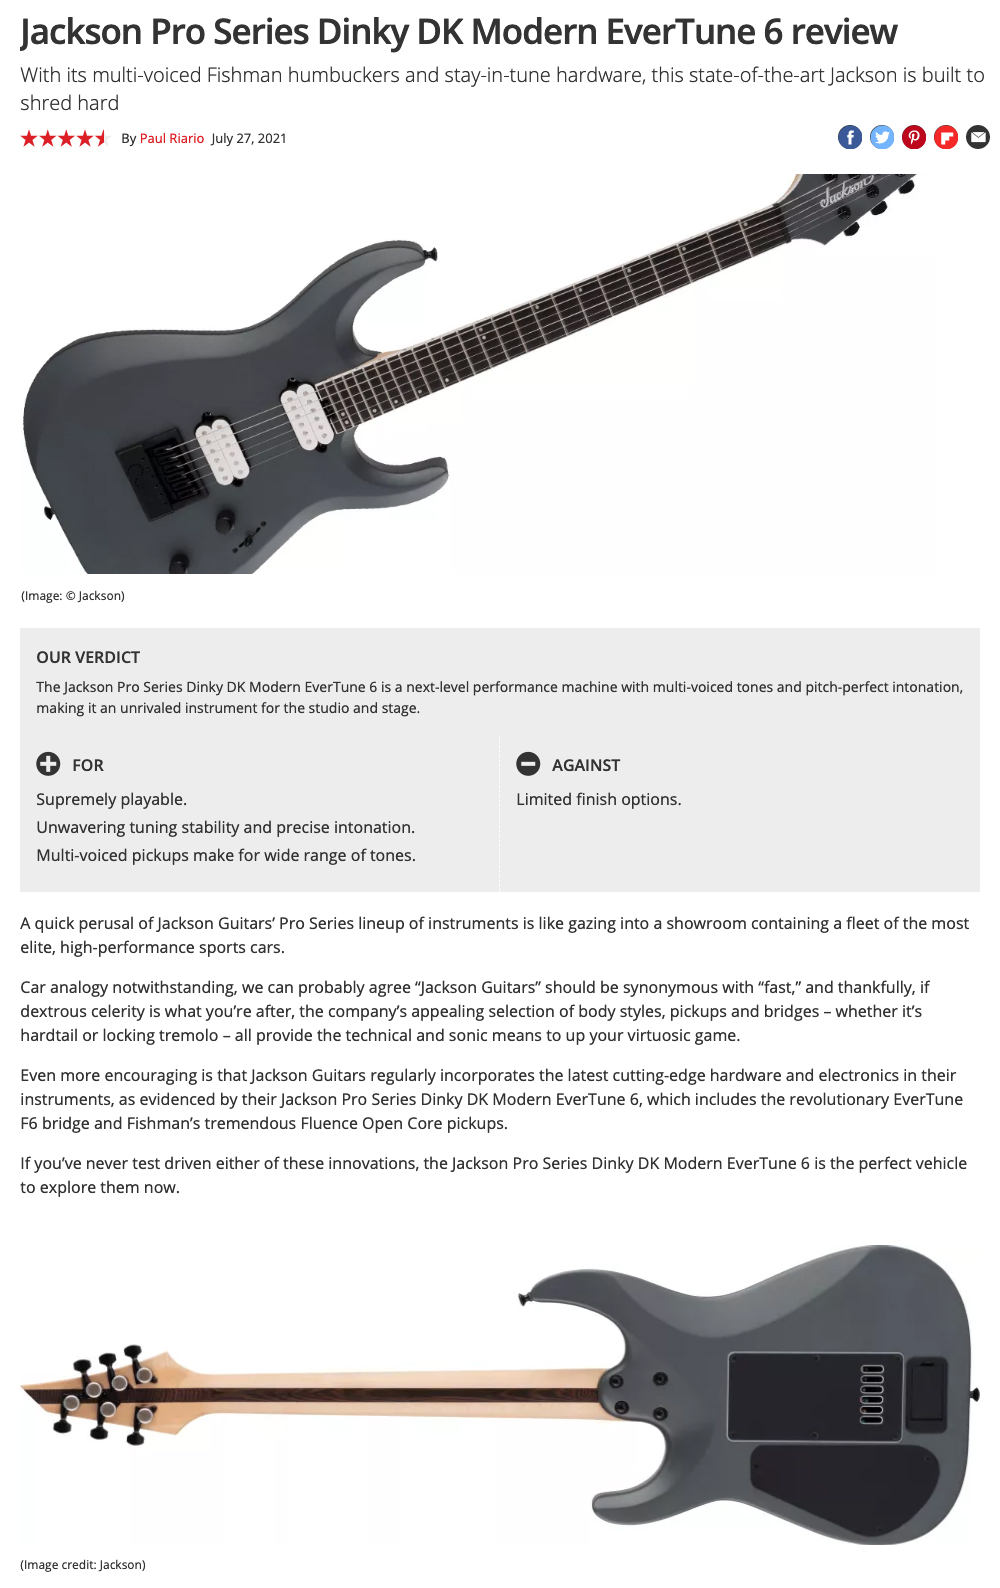 Jackson Pro Series Dinky DK Modern EverTune 6 review in Guitar World Magazine by Paul Riario